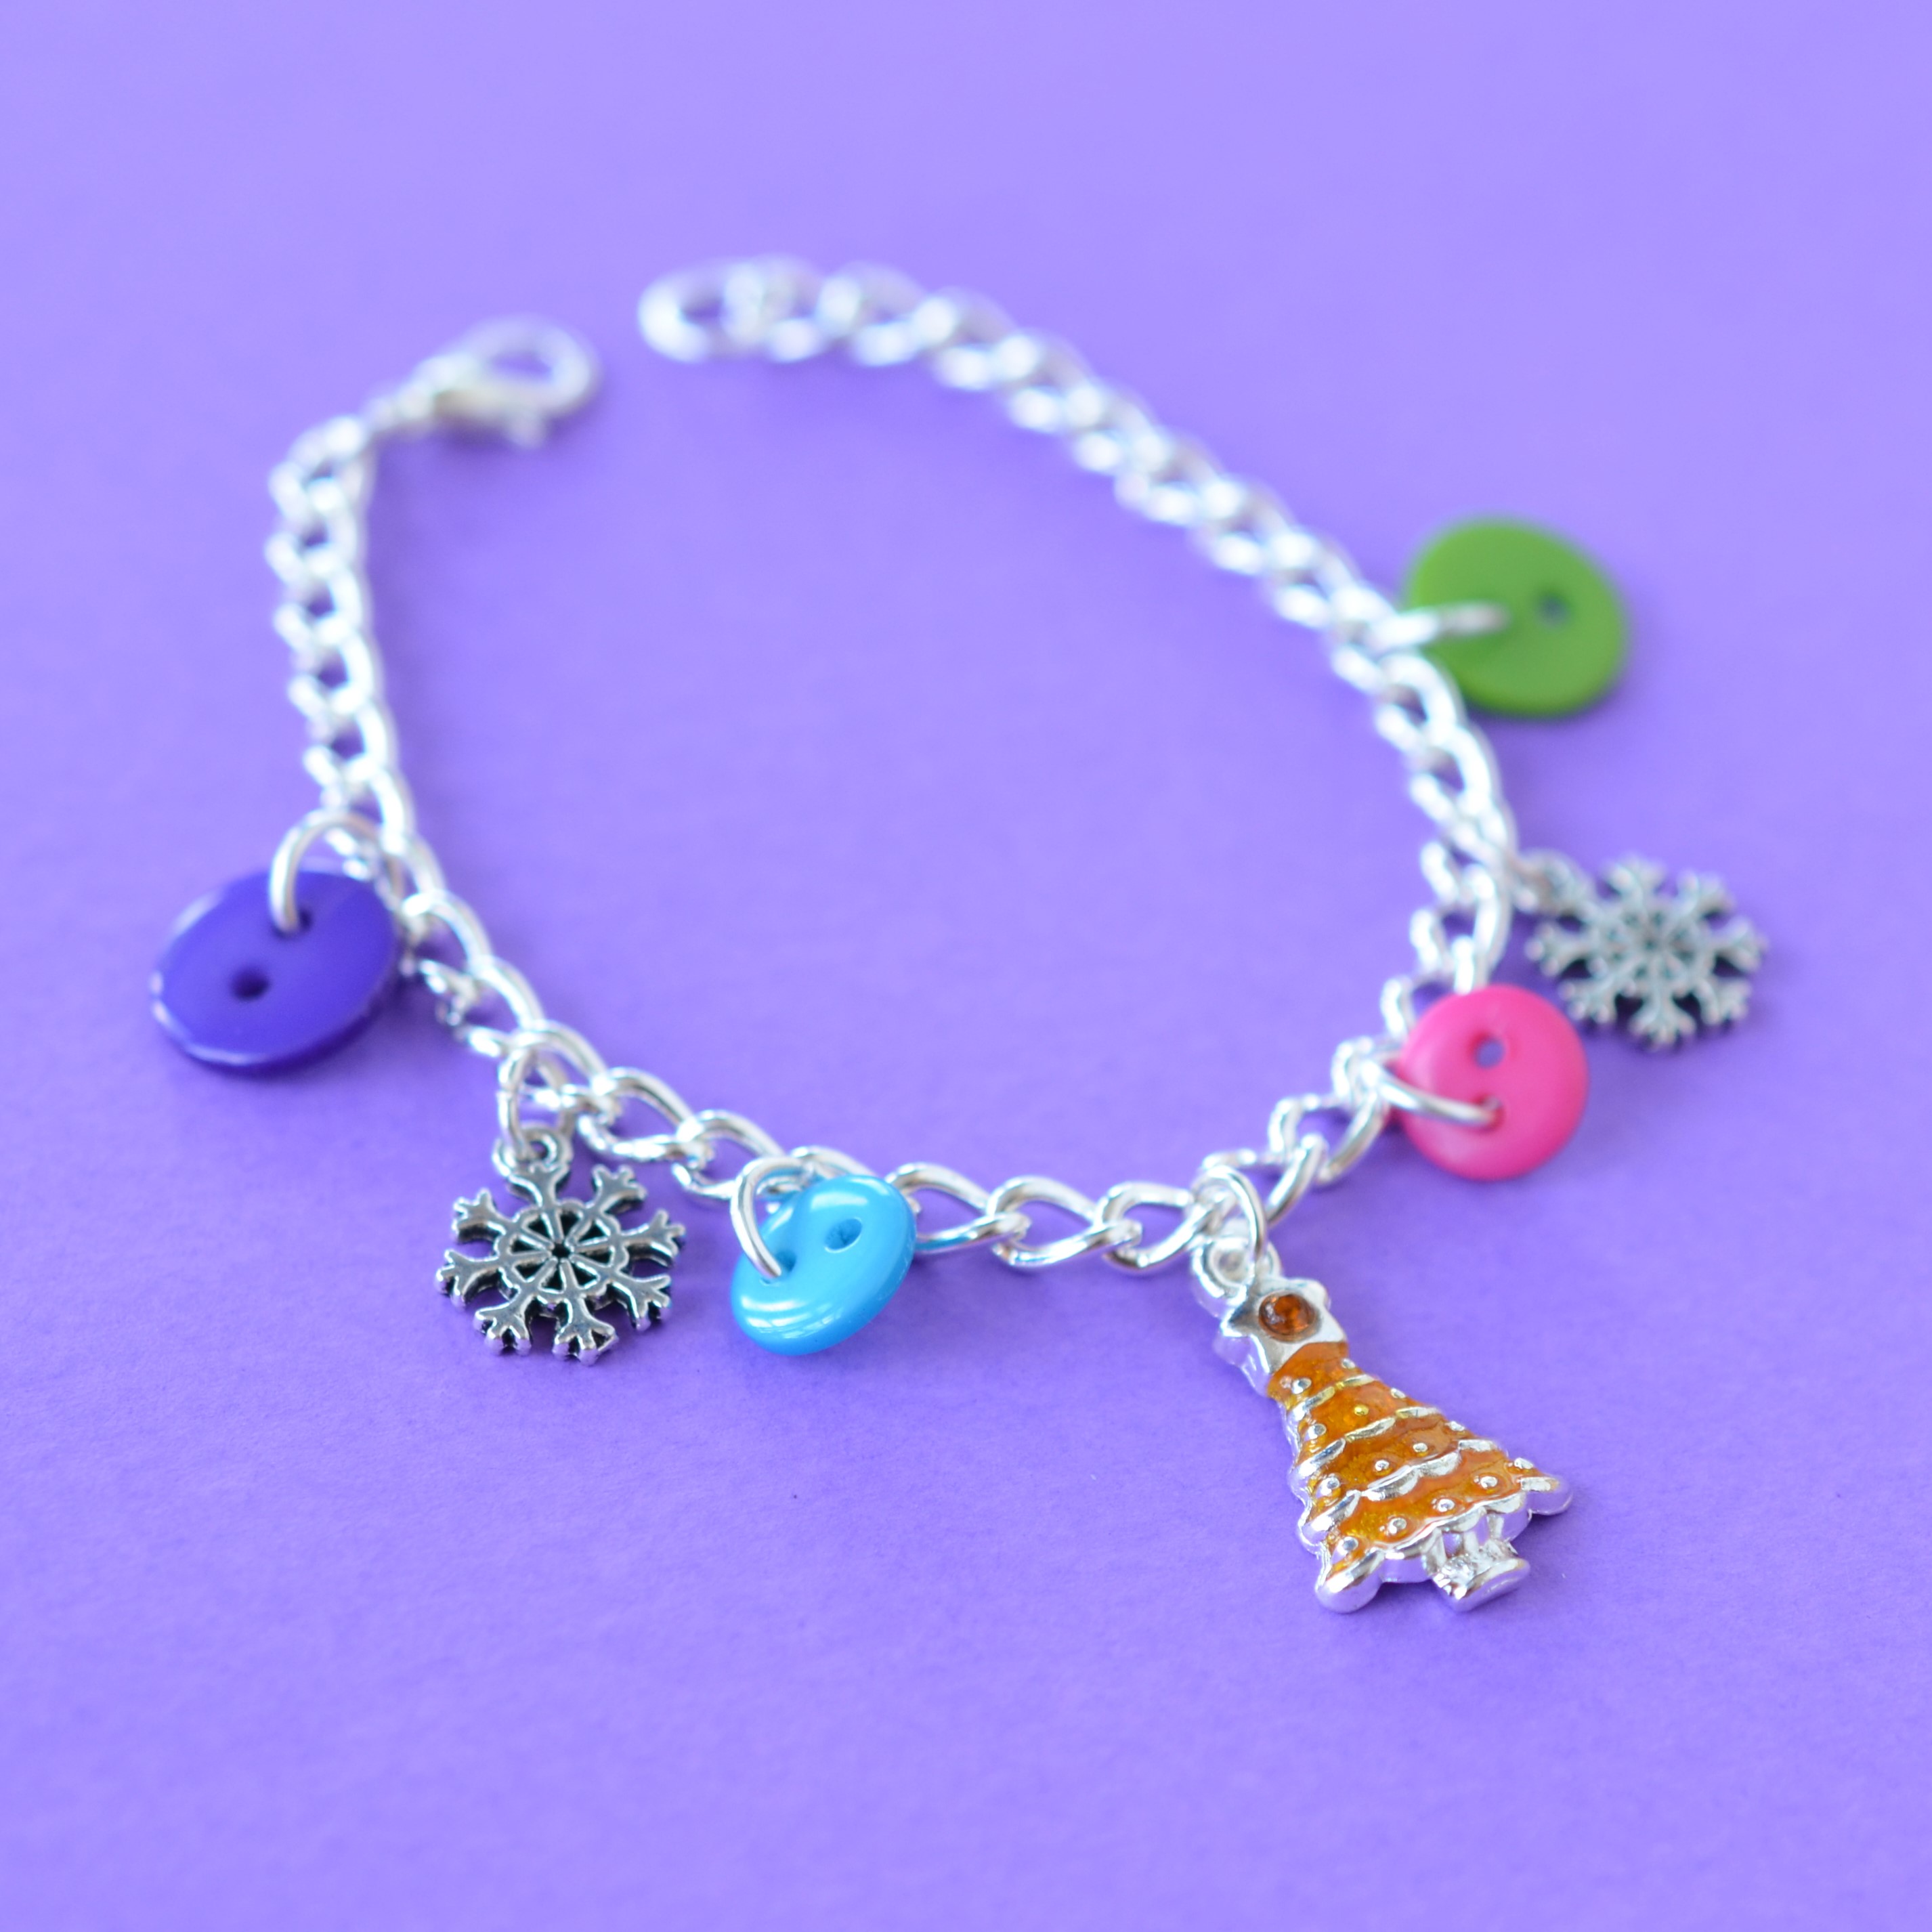 Christmas Tree Children's Festive Button Charm Bracelet Available in Choice of Colours